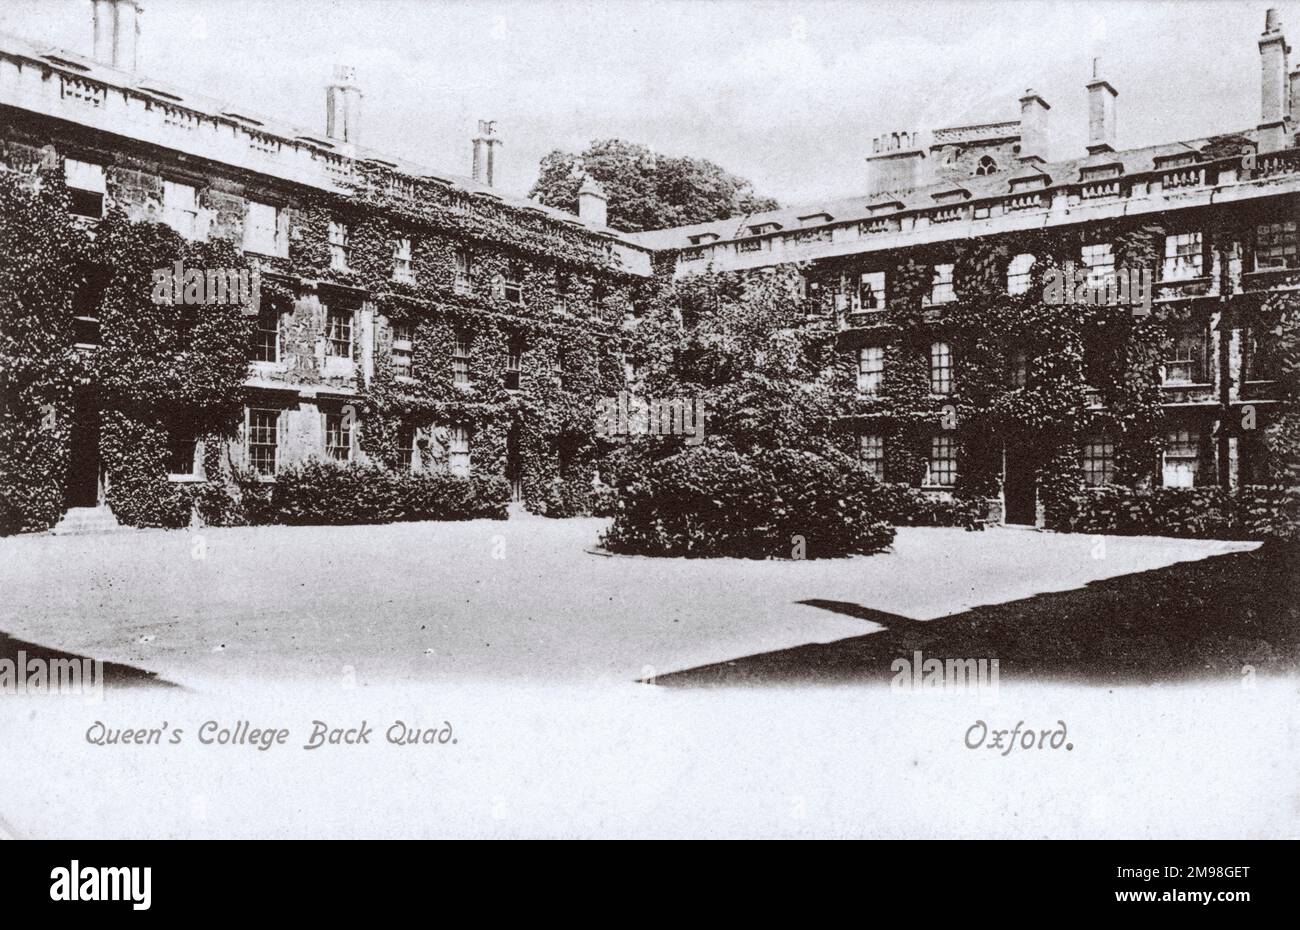 Queen's College Back Quad, Oxford, where Harold Auerbach spent two weeks in June 1917 during his Royal Flying Corps training. Stock Photo